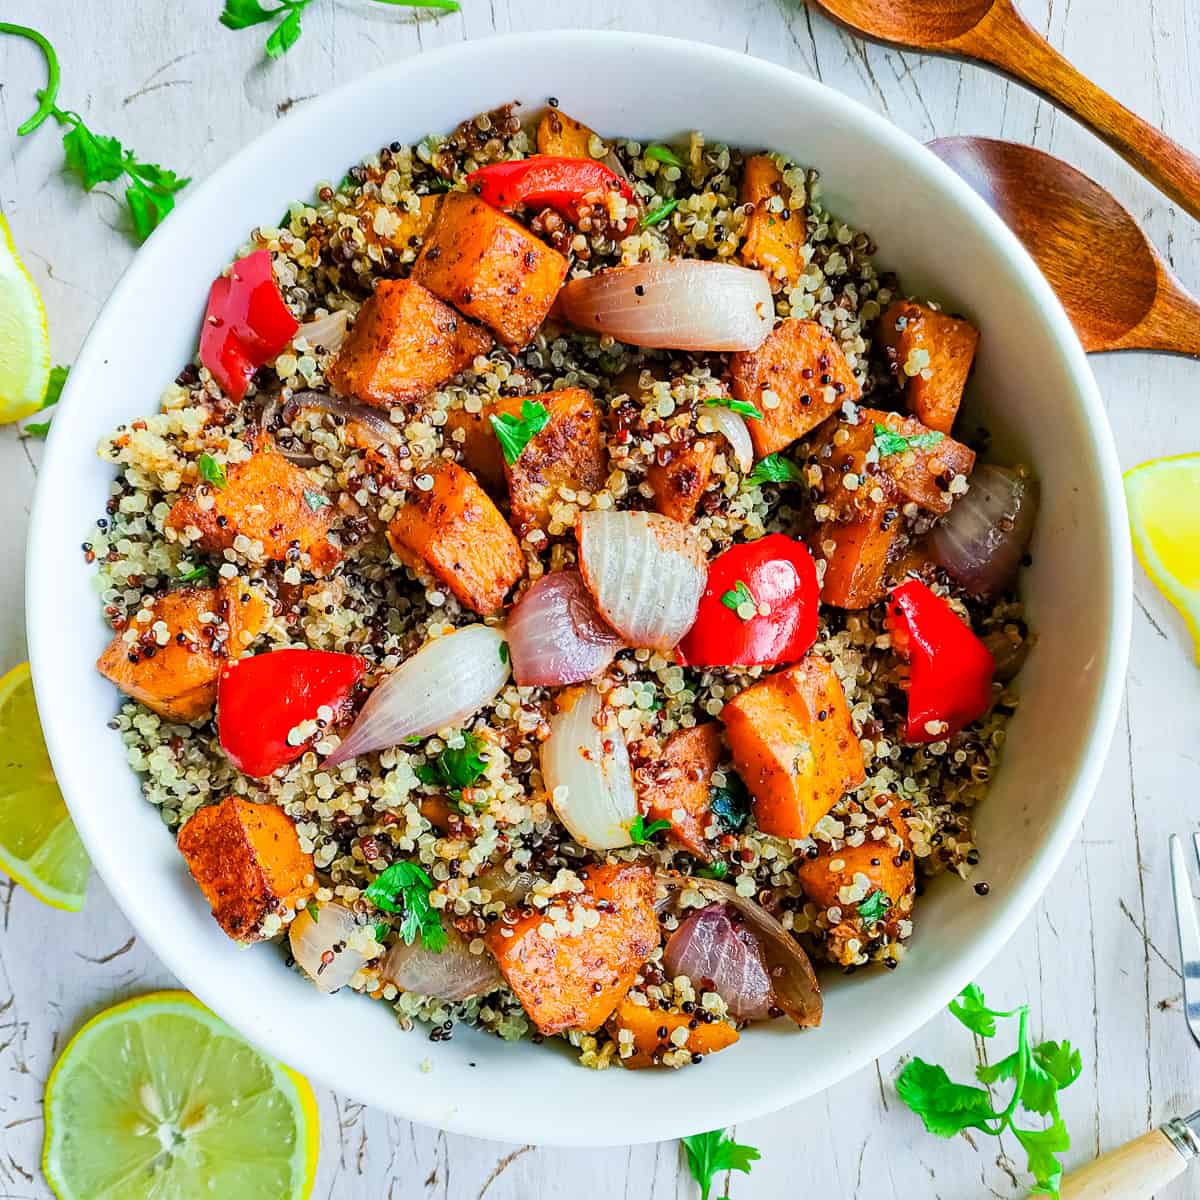 Roasted pumpkin salad with quinoa in a white bowl.